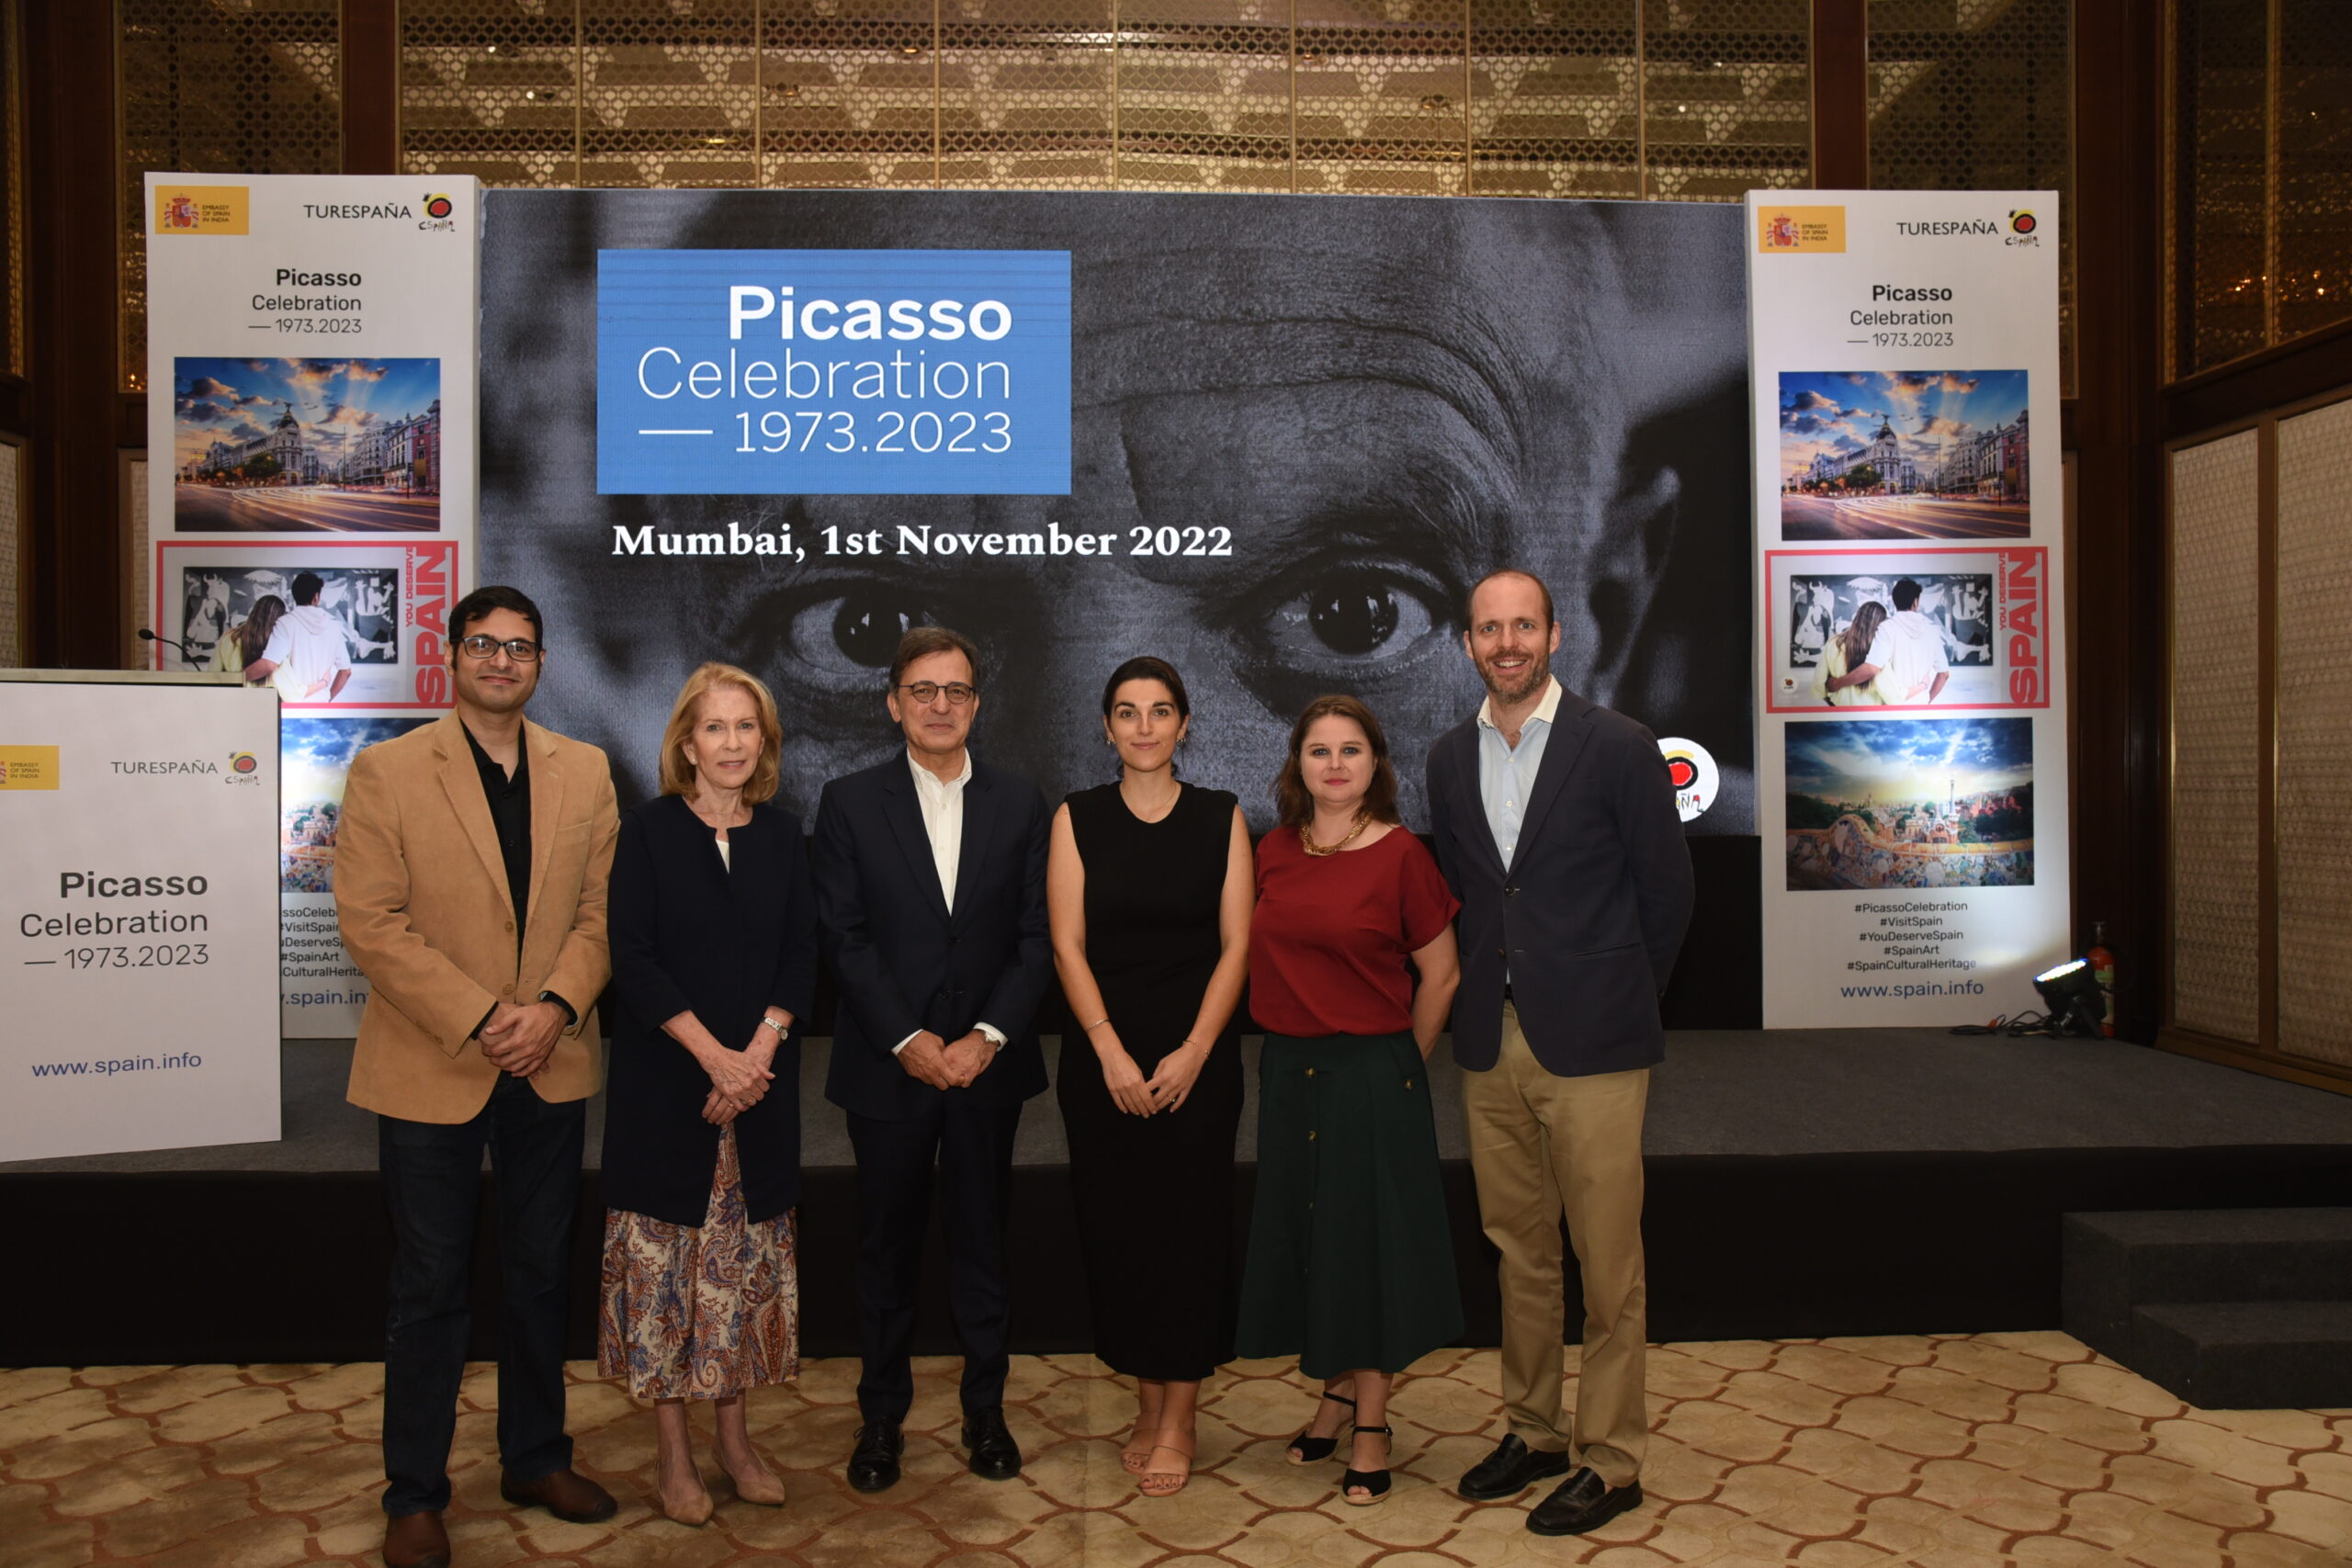 Spain officially launches its campaign on Picasso Celebration 1973-2023 in Mumbai